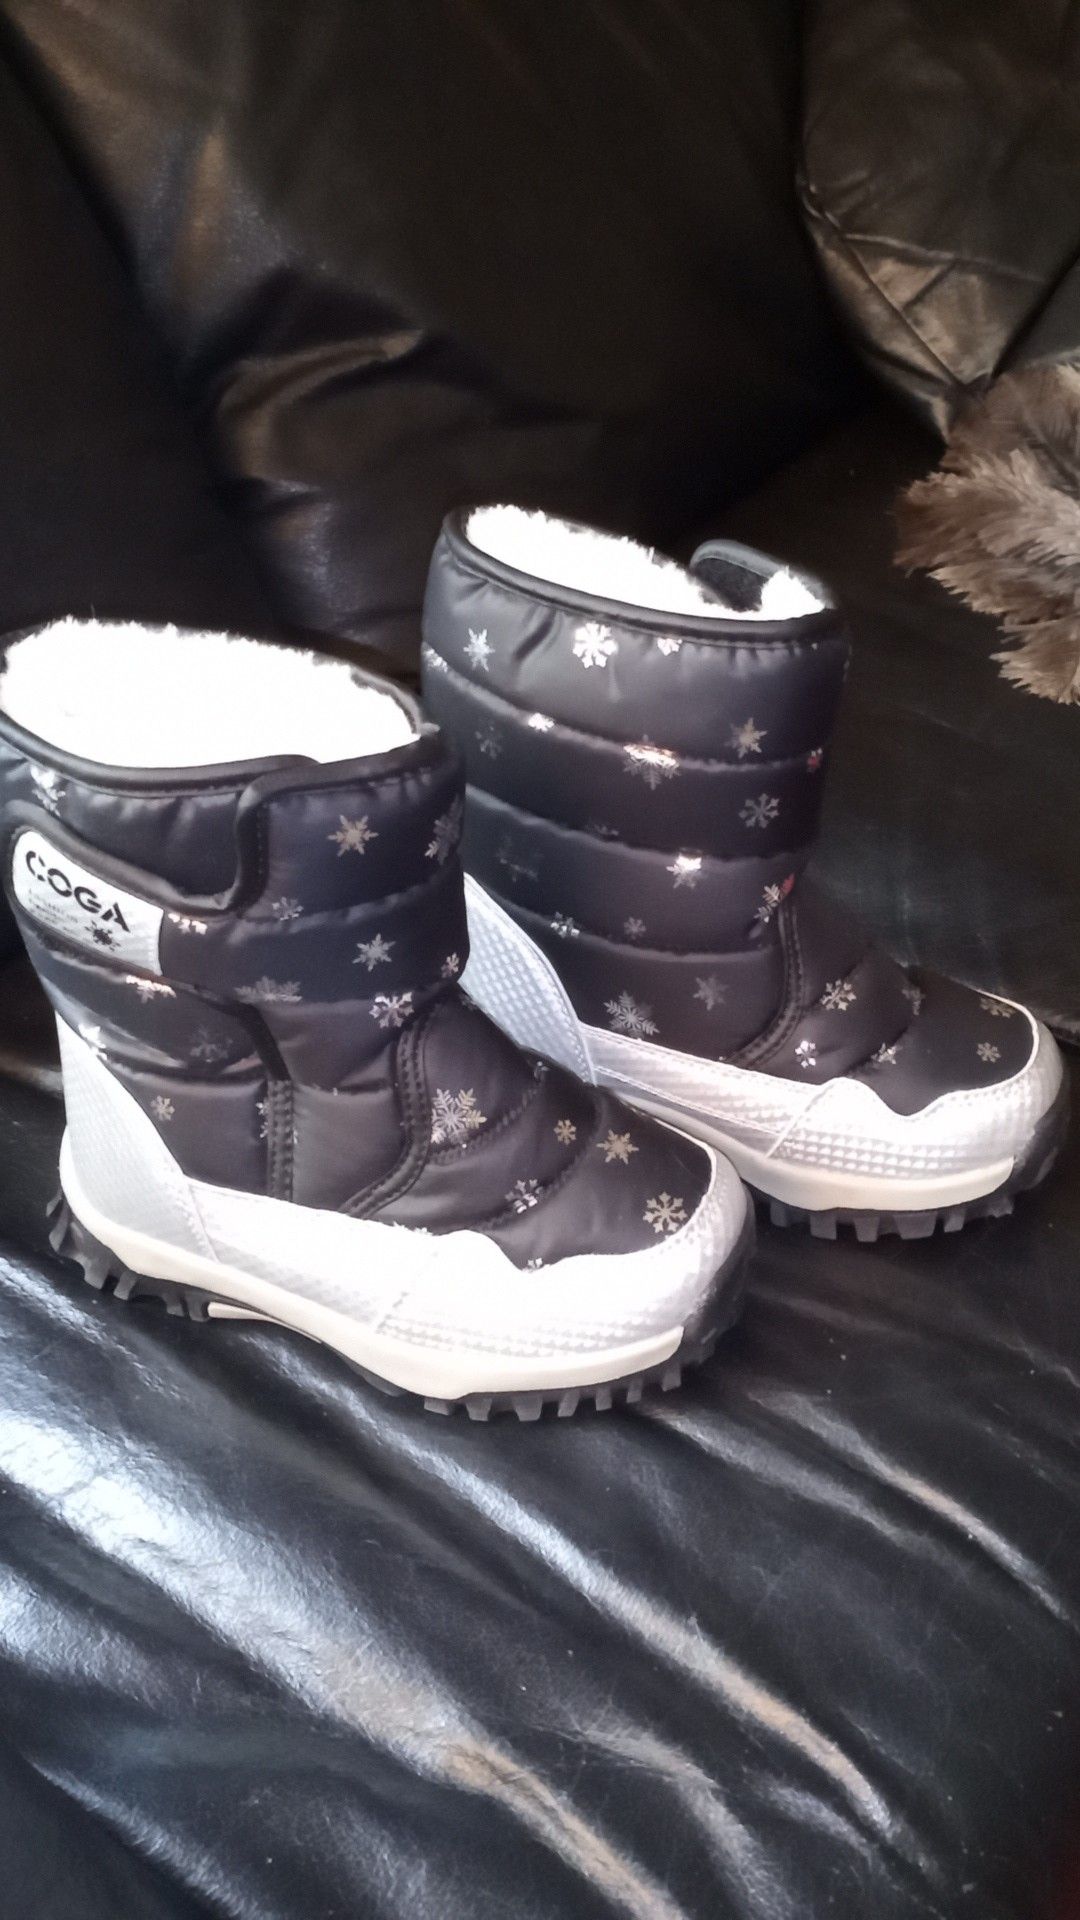 Girls rain boots / snow boots size 1 and 1/2 toddler / youth in great condition brand new condition